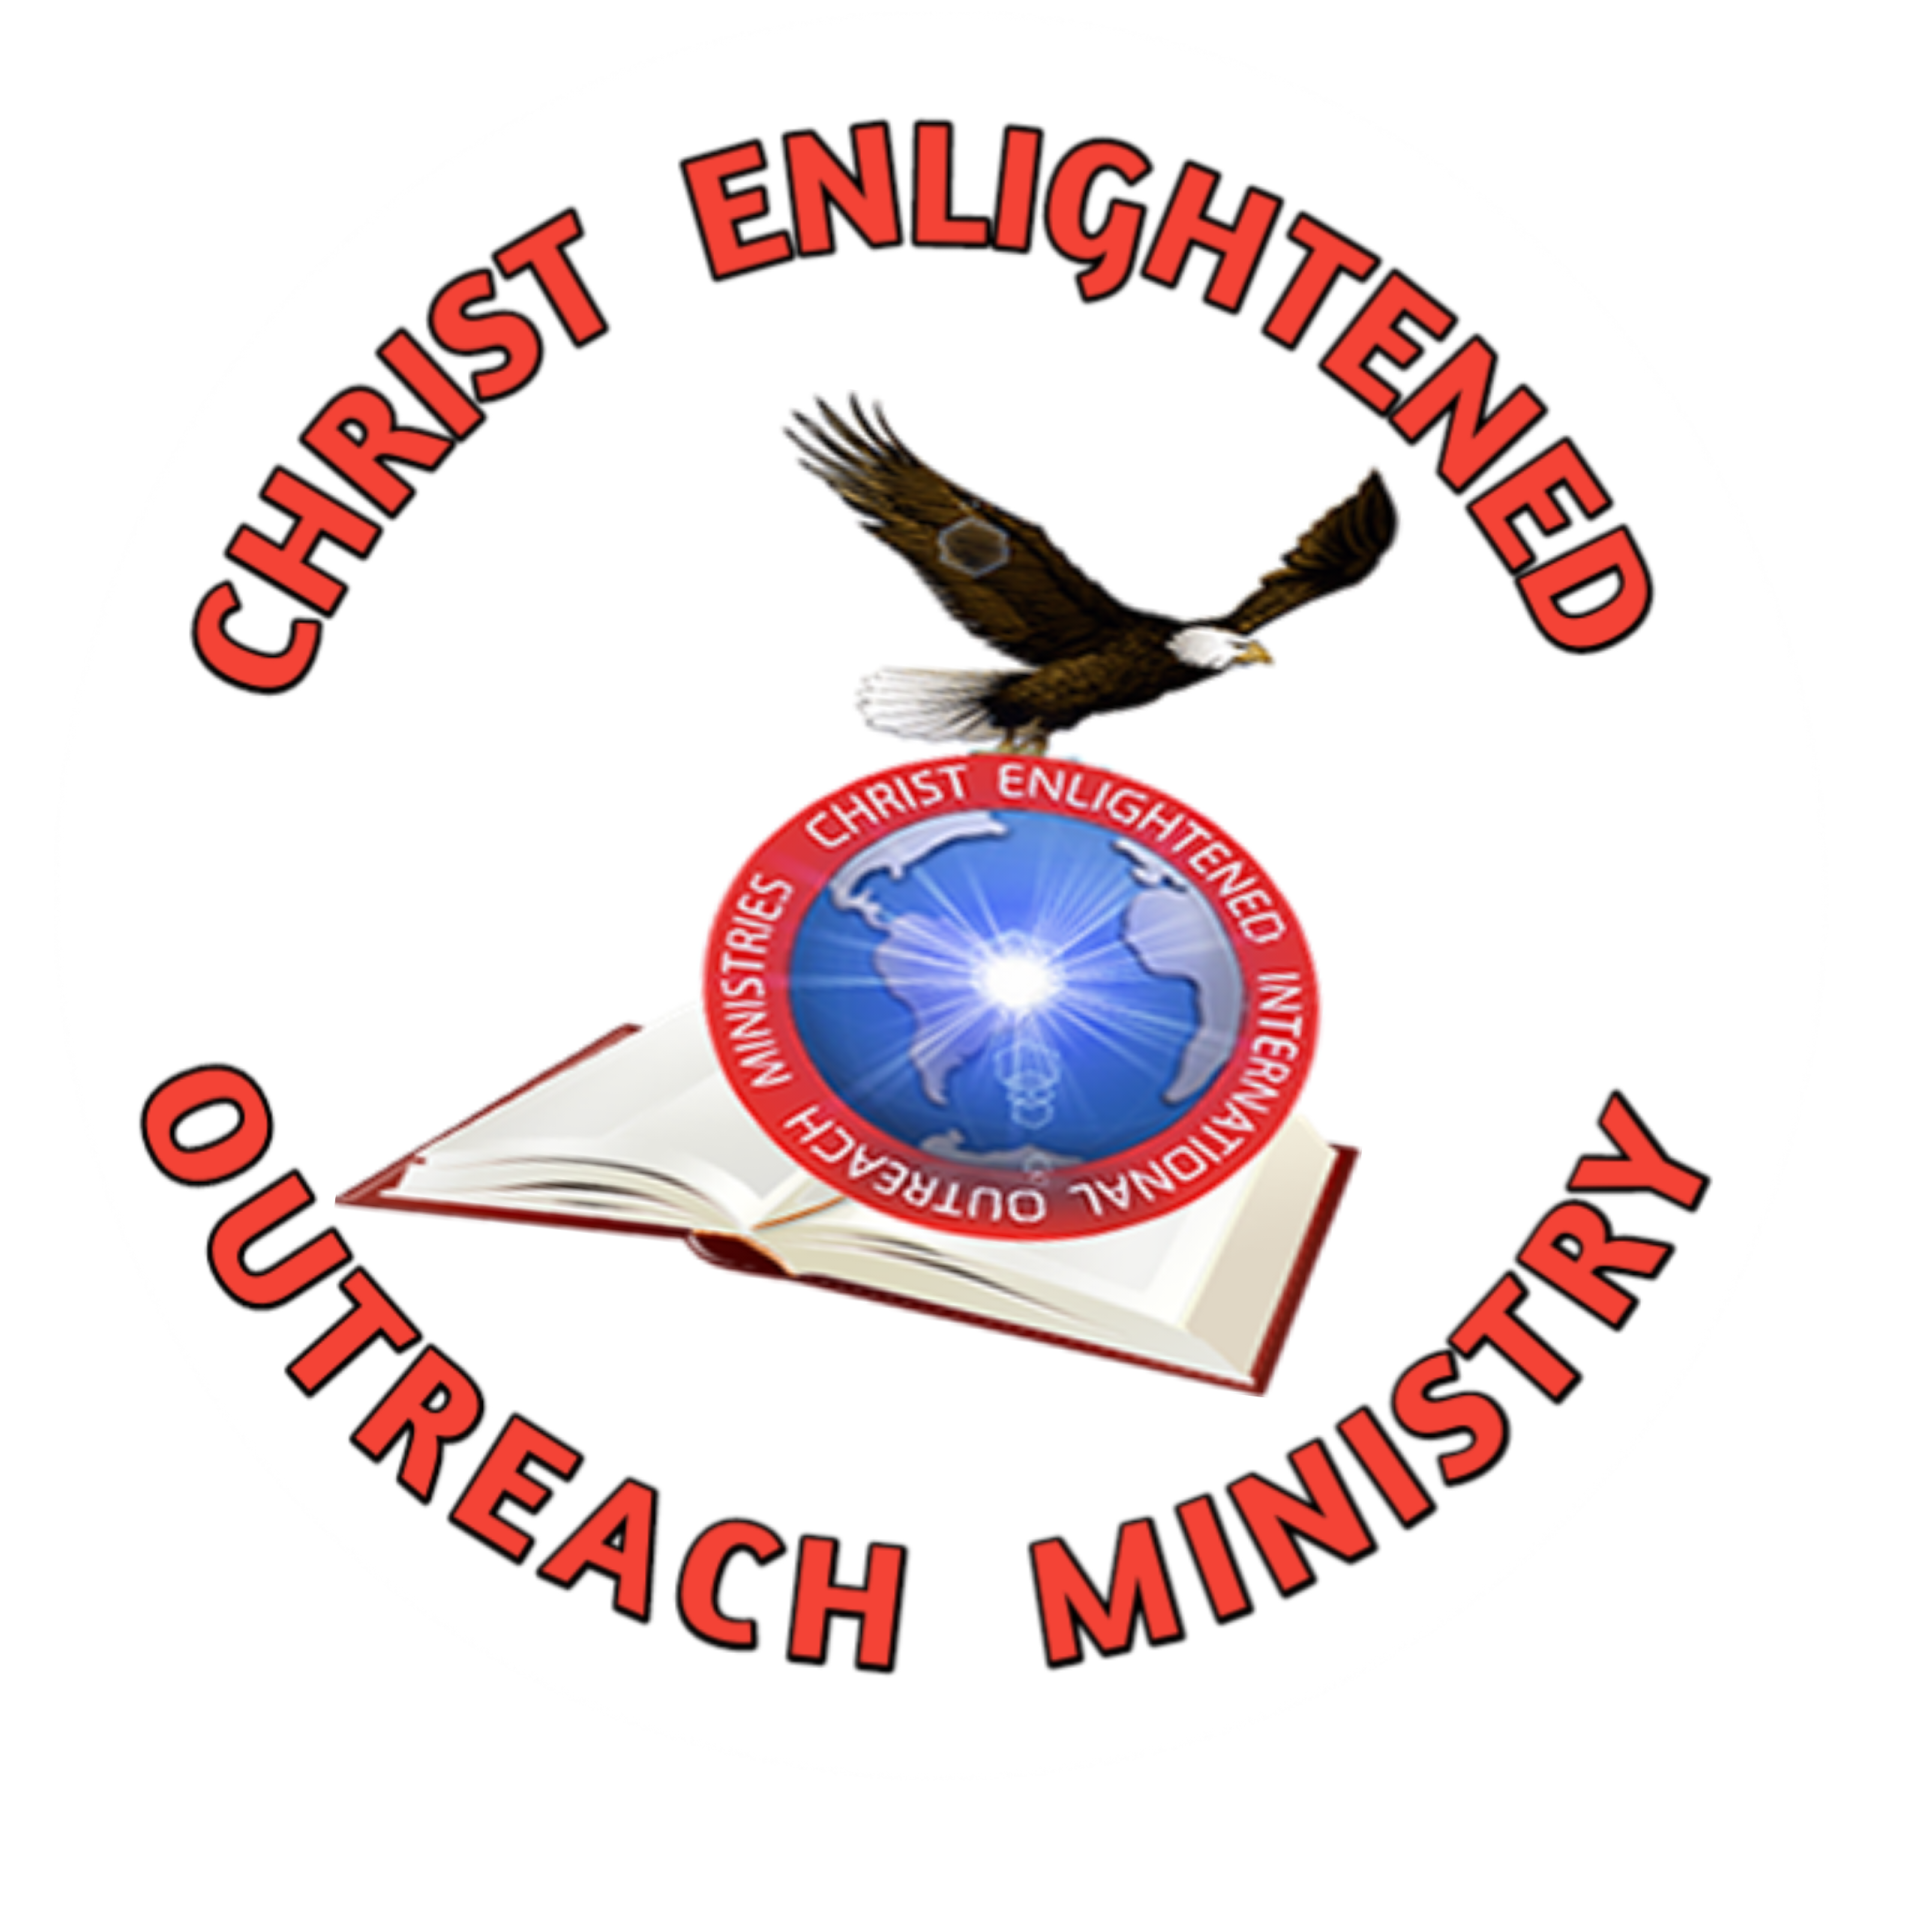 a logo for the Christ Enlightened Outreach Ministry